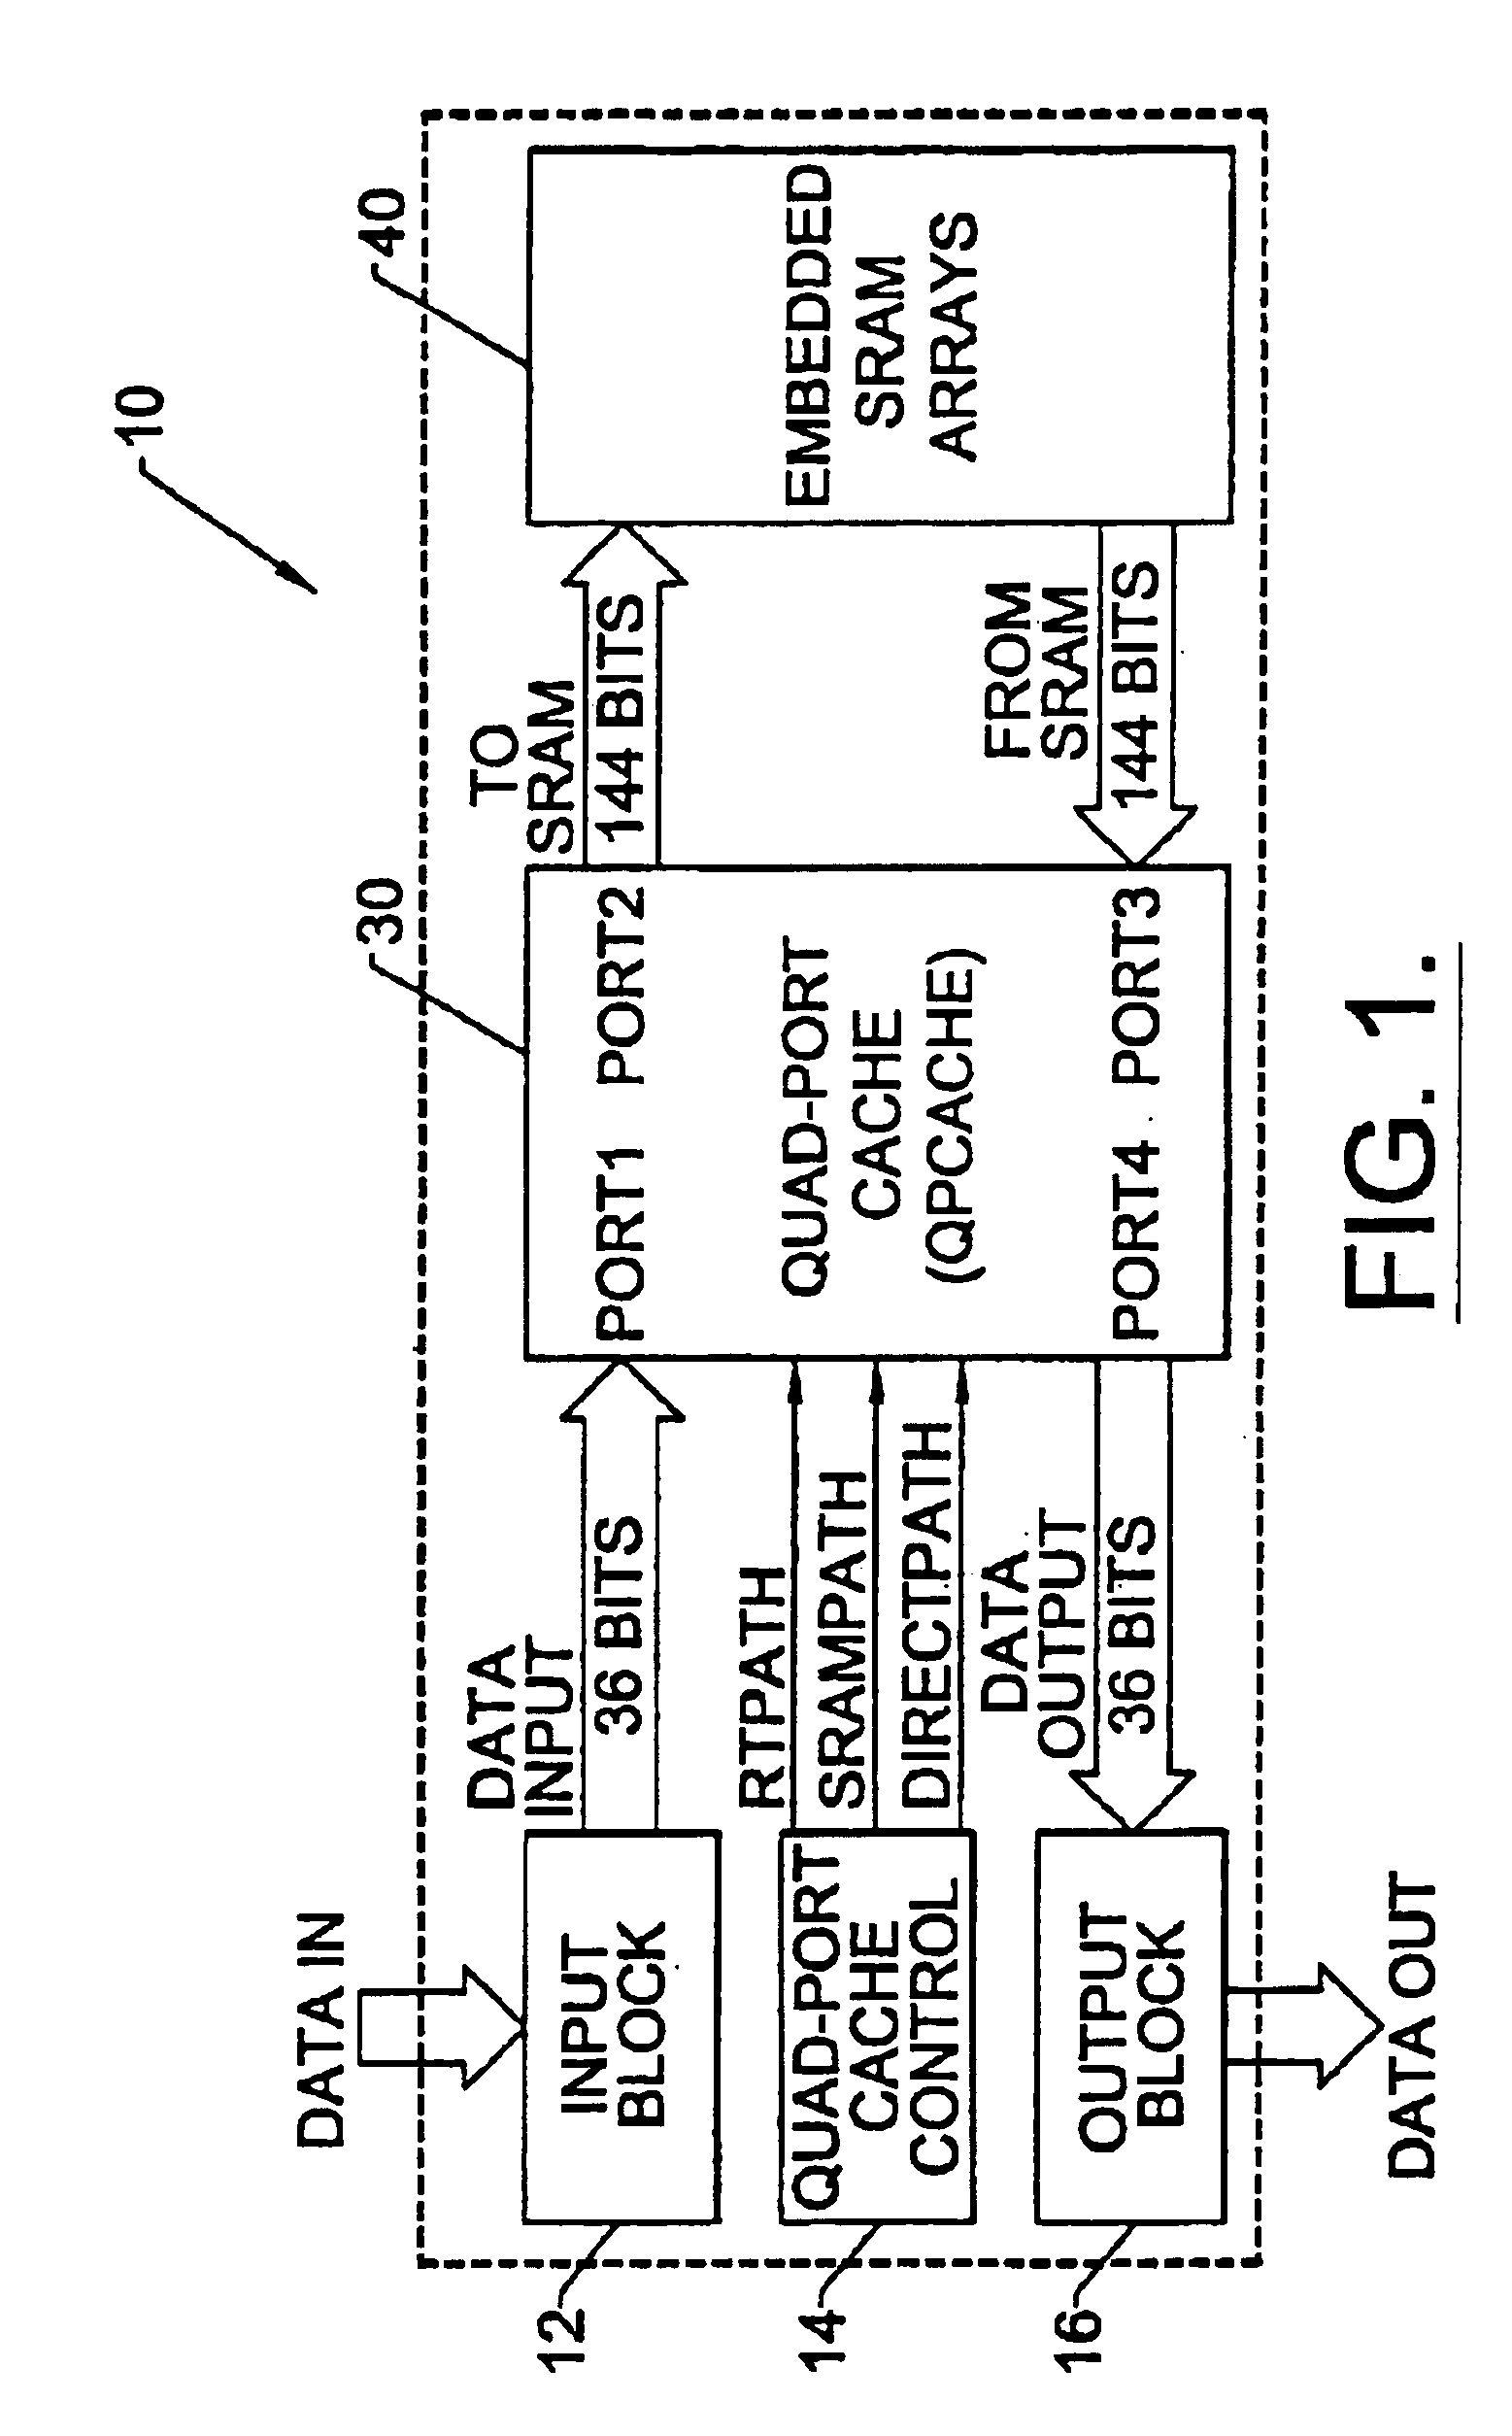 FIFO memory devices having multi-port cache and extended capacity memory devices therein with retransmit capability